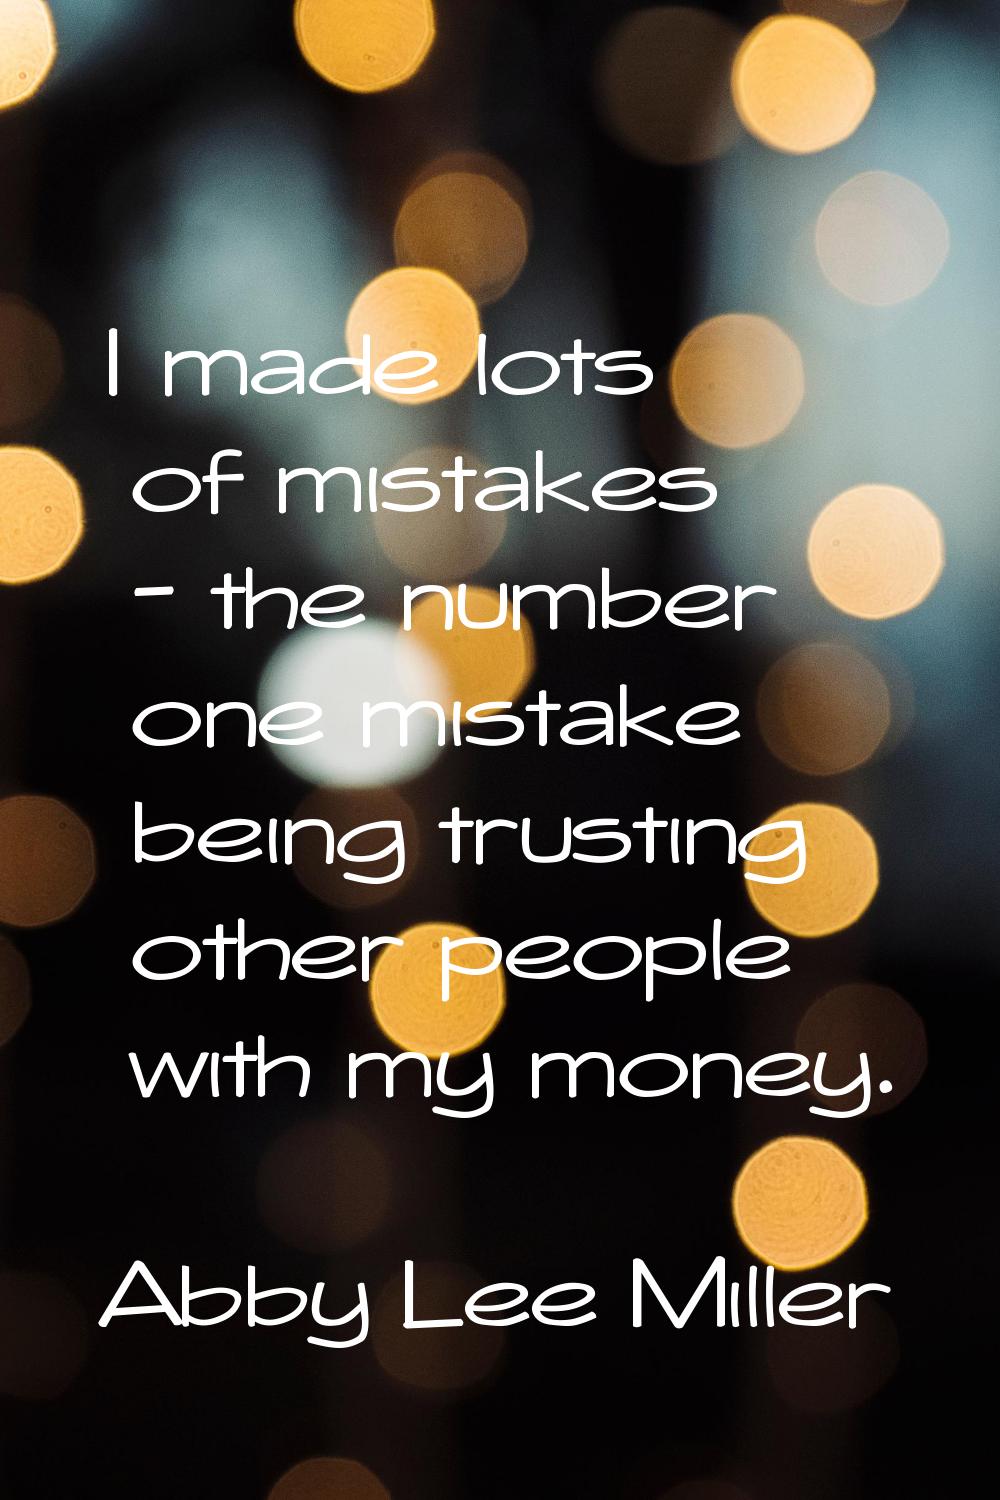 I made lots of mistakes - the number one mistake being trusting other people with my money.